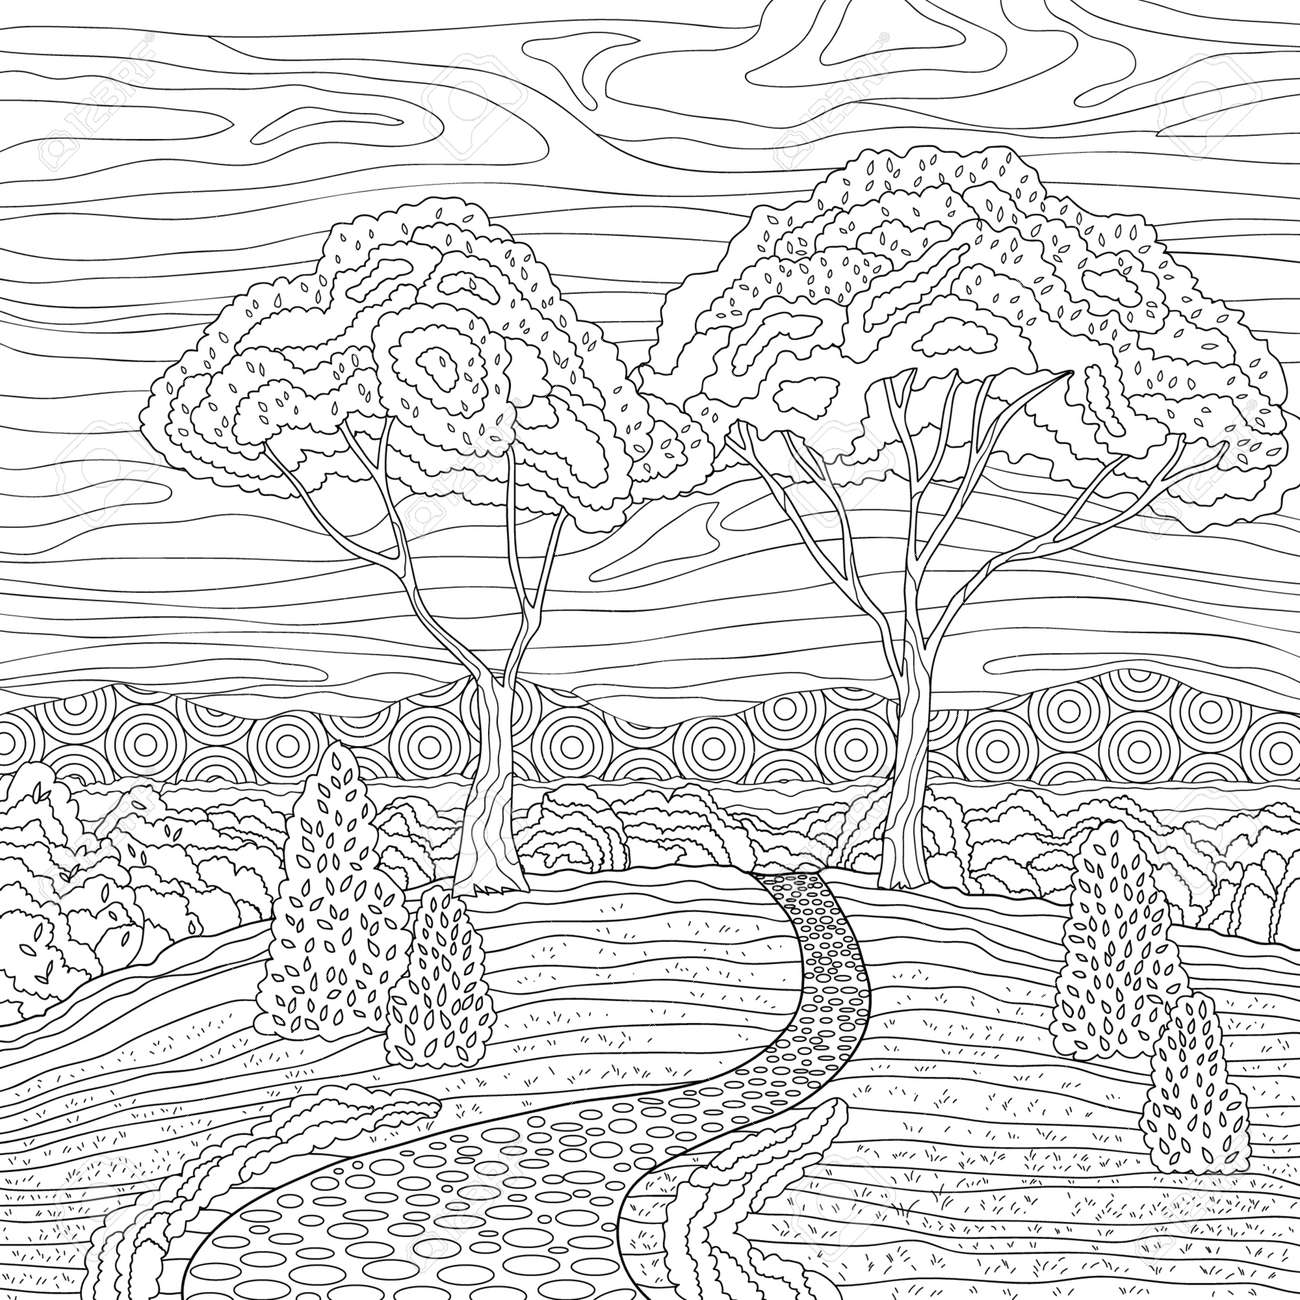 Landscape coloring book page for adult nature field with trees stone road and sky for meditation and anti stress vector illustration with doodle royalty free svg cliparts vectors and stock illustration image